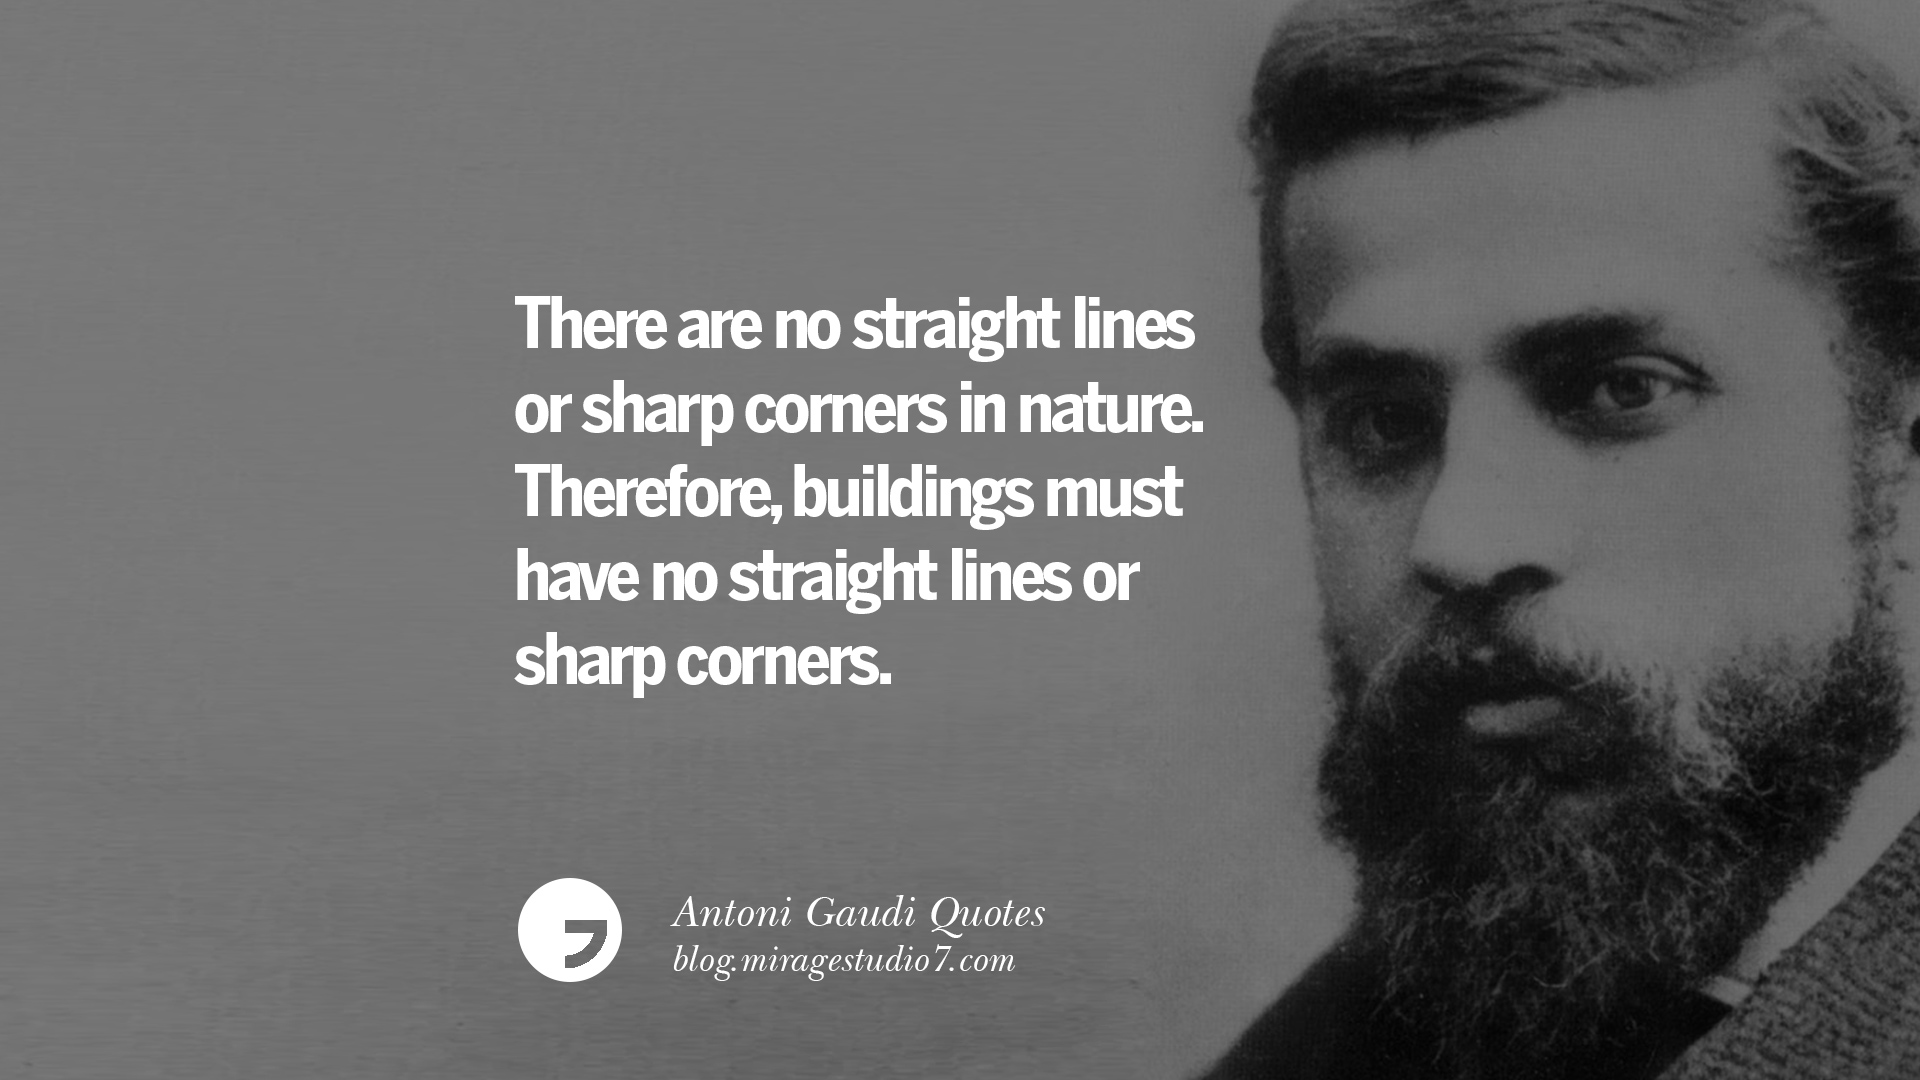 11 Antoni Gaudi Quotes On Religion, God And Nature